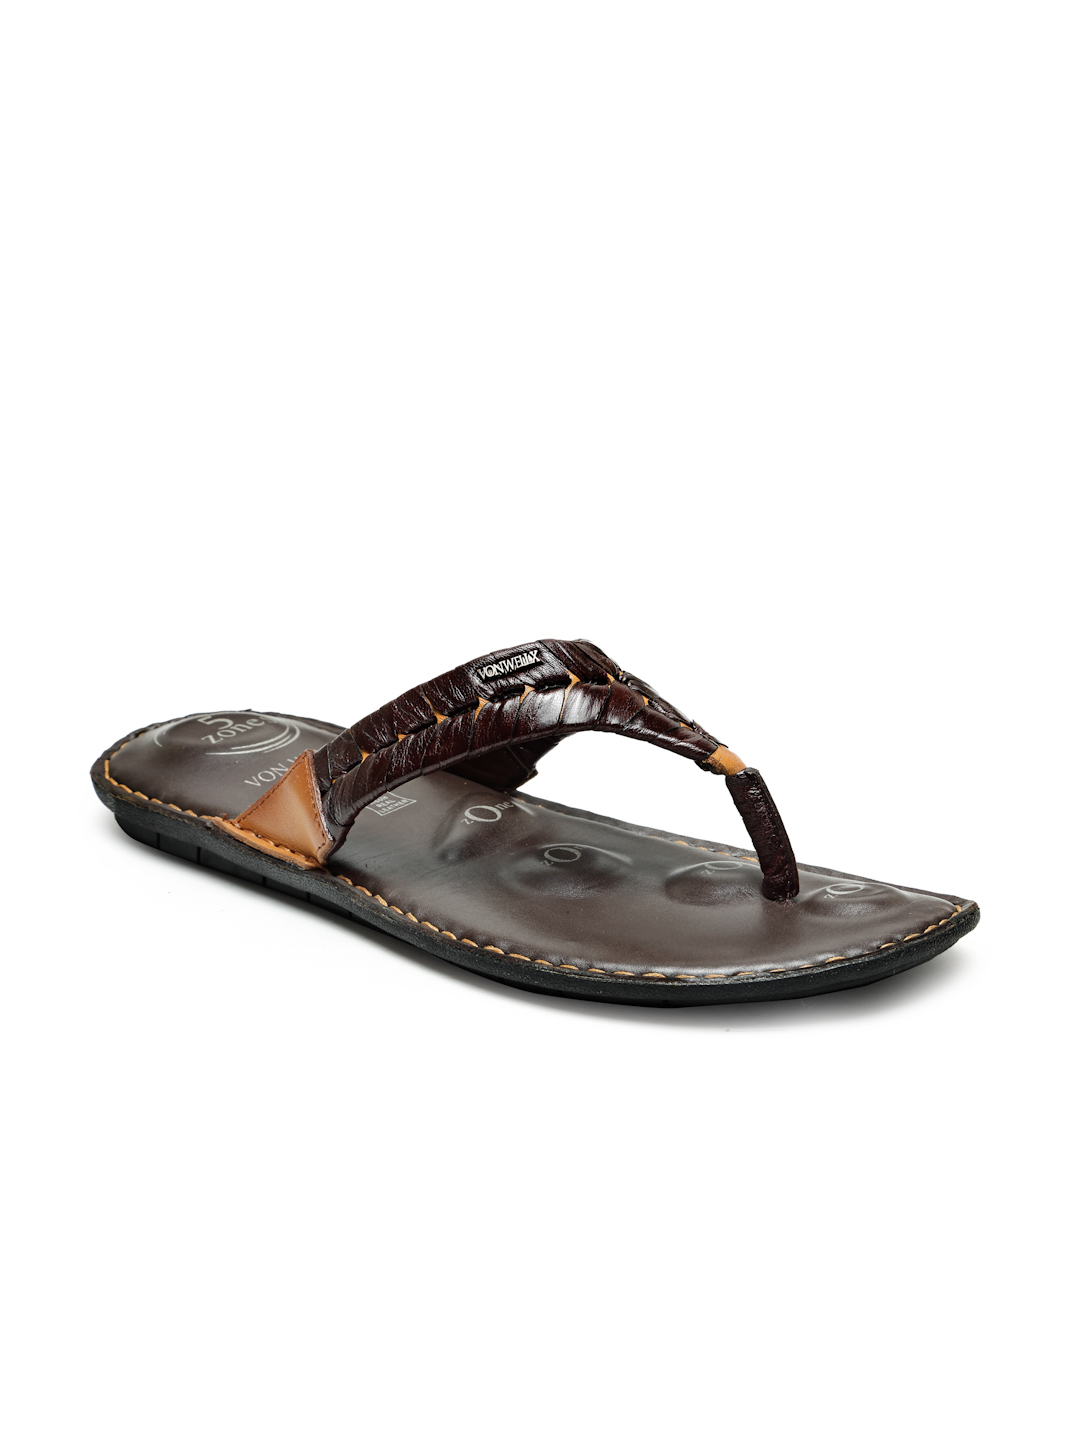 Buy Von Wellx Germany Comfort Men's Tan Slippers Alonso Online in Chennai